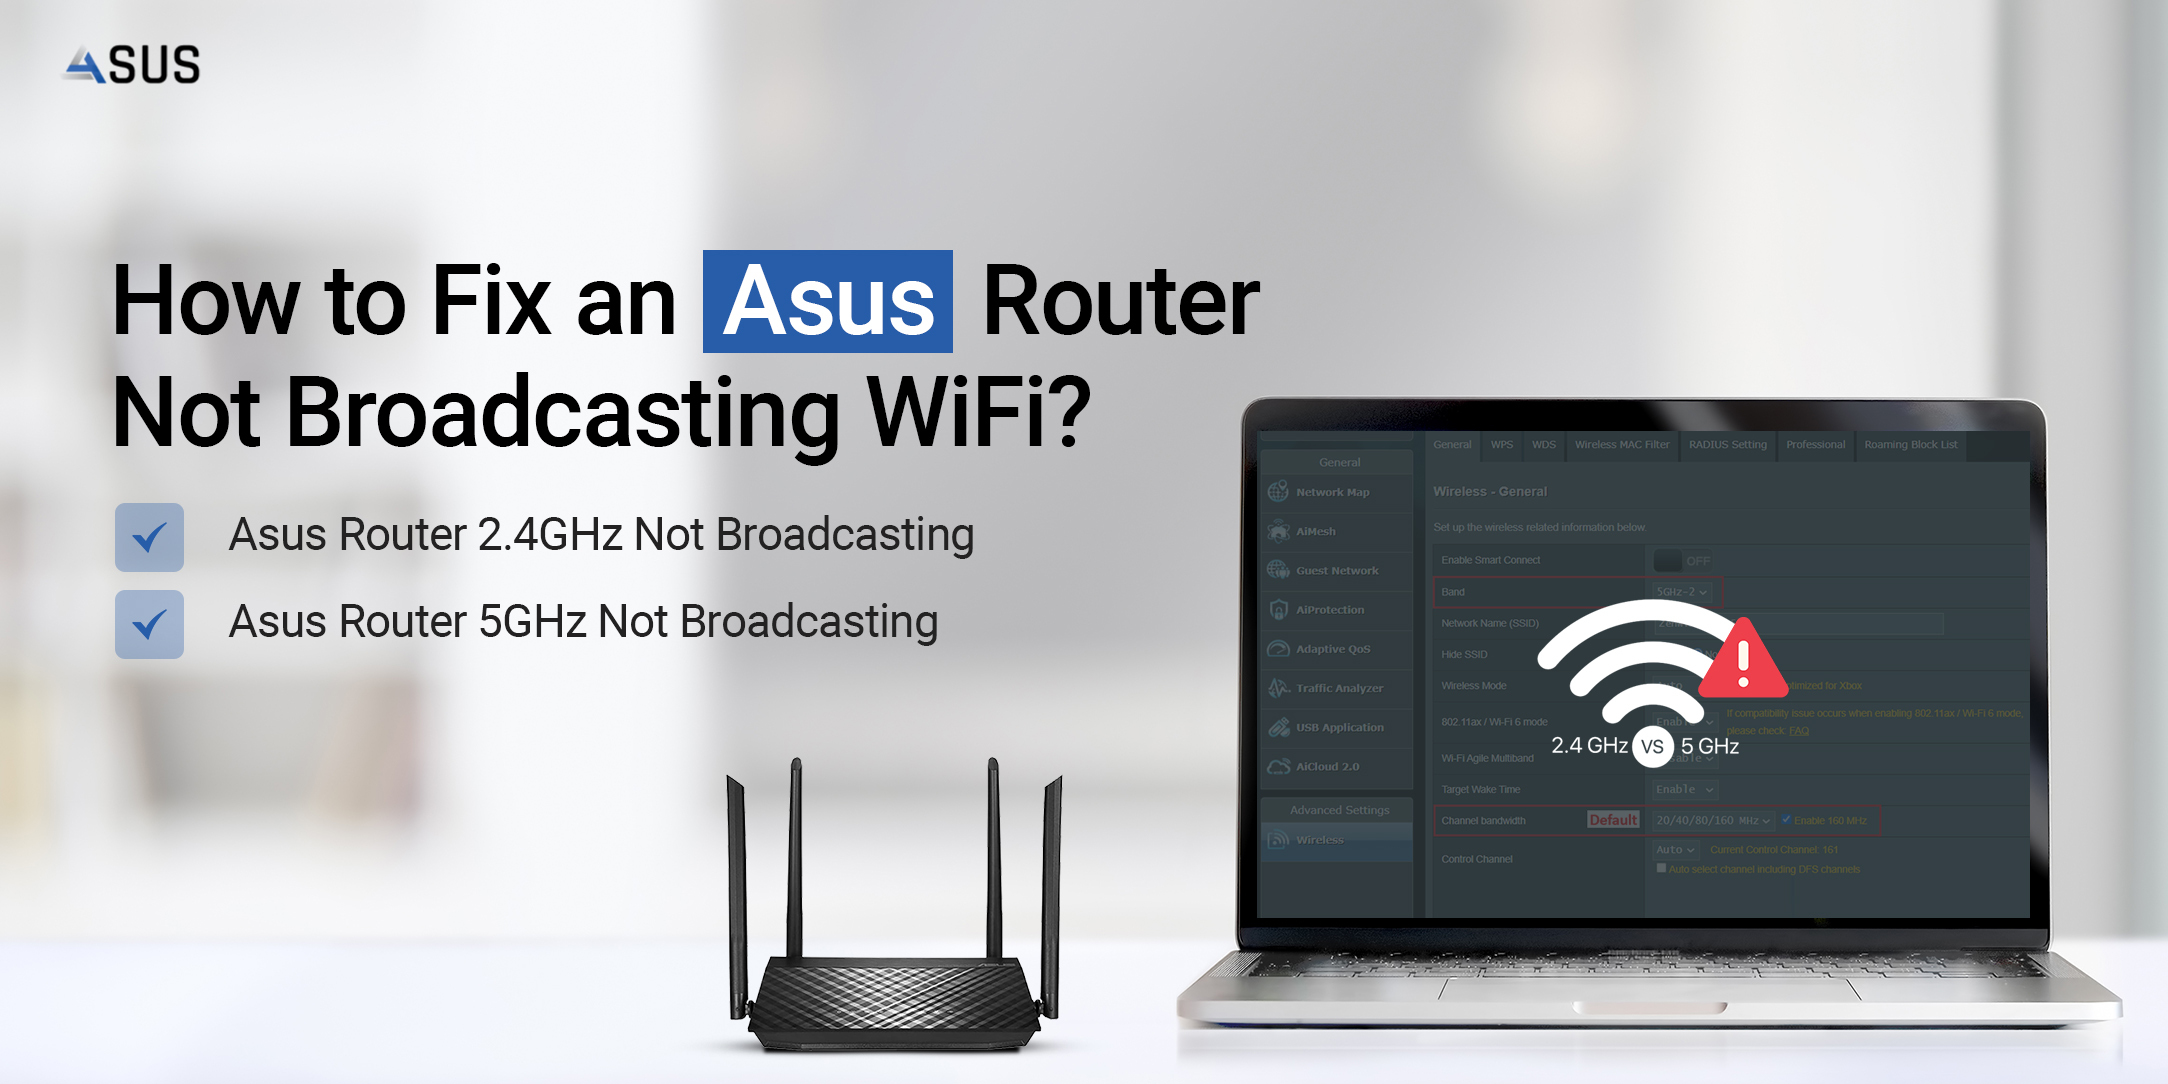 Asus Router Not Broadcasting WiFi